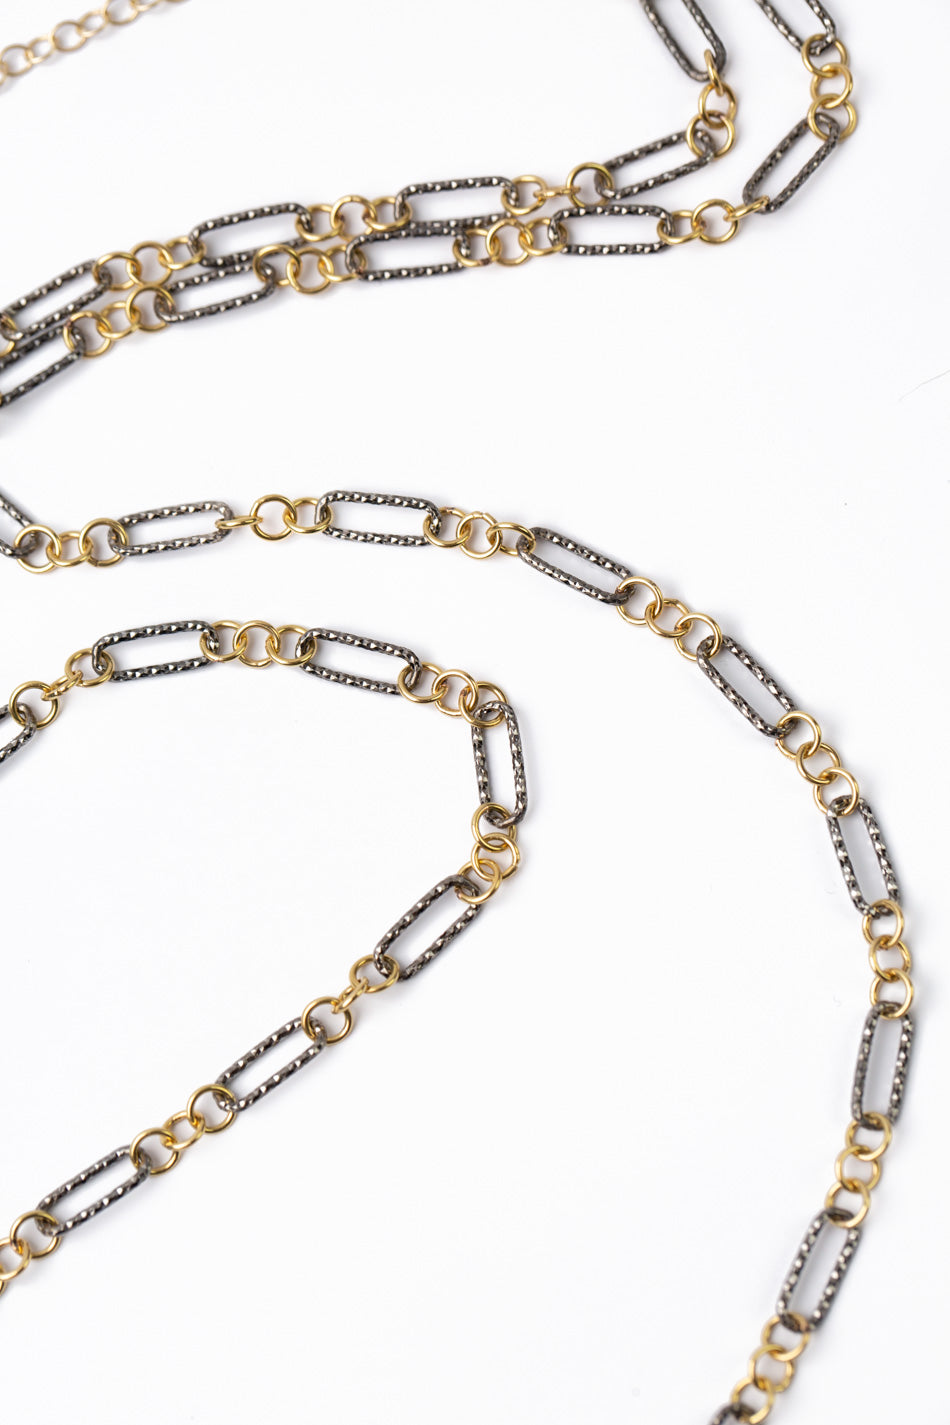 One Of A Kind 40-42"  Handmade Oxidized Sterling Silver And Gold Filled Chain Simple Necklace